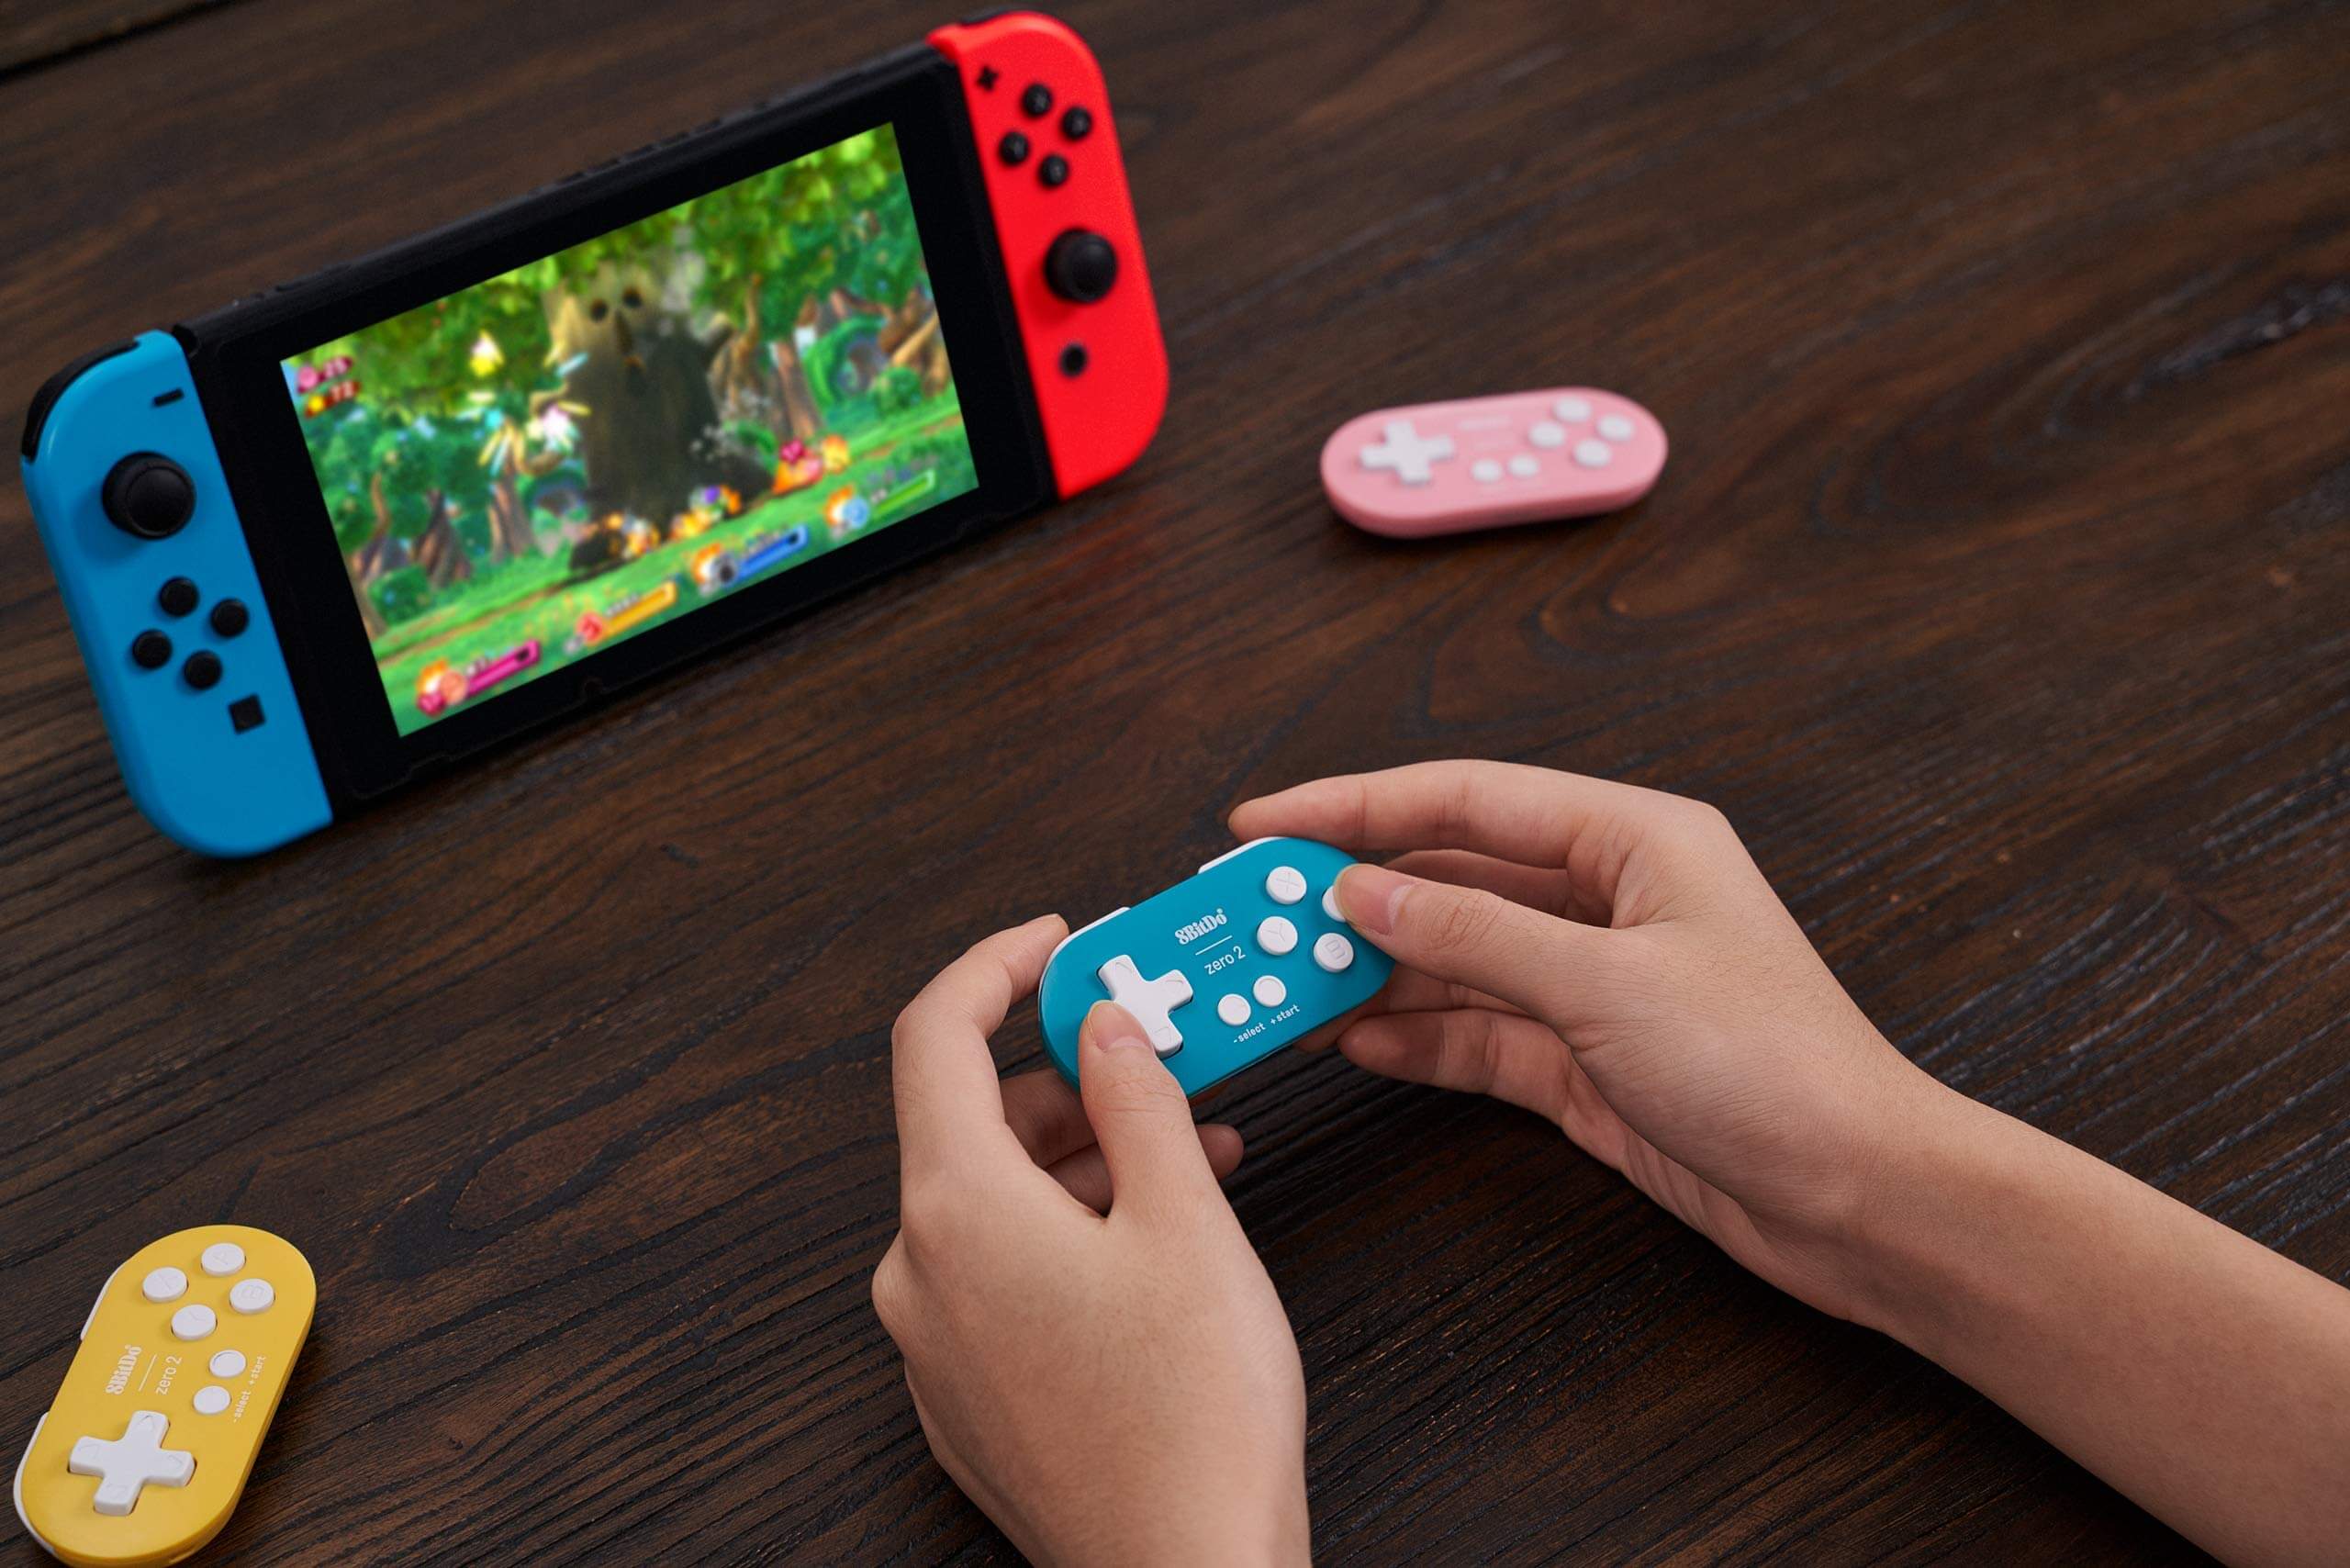 8BitDo's tiny Bluetooth gamepad is now available to pre-order